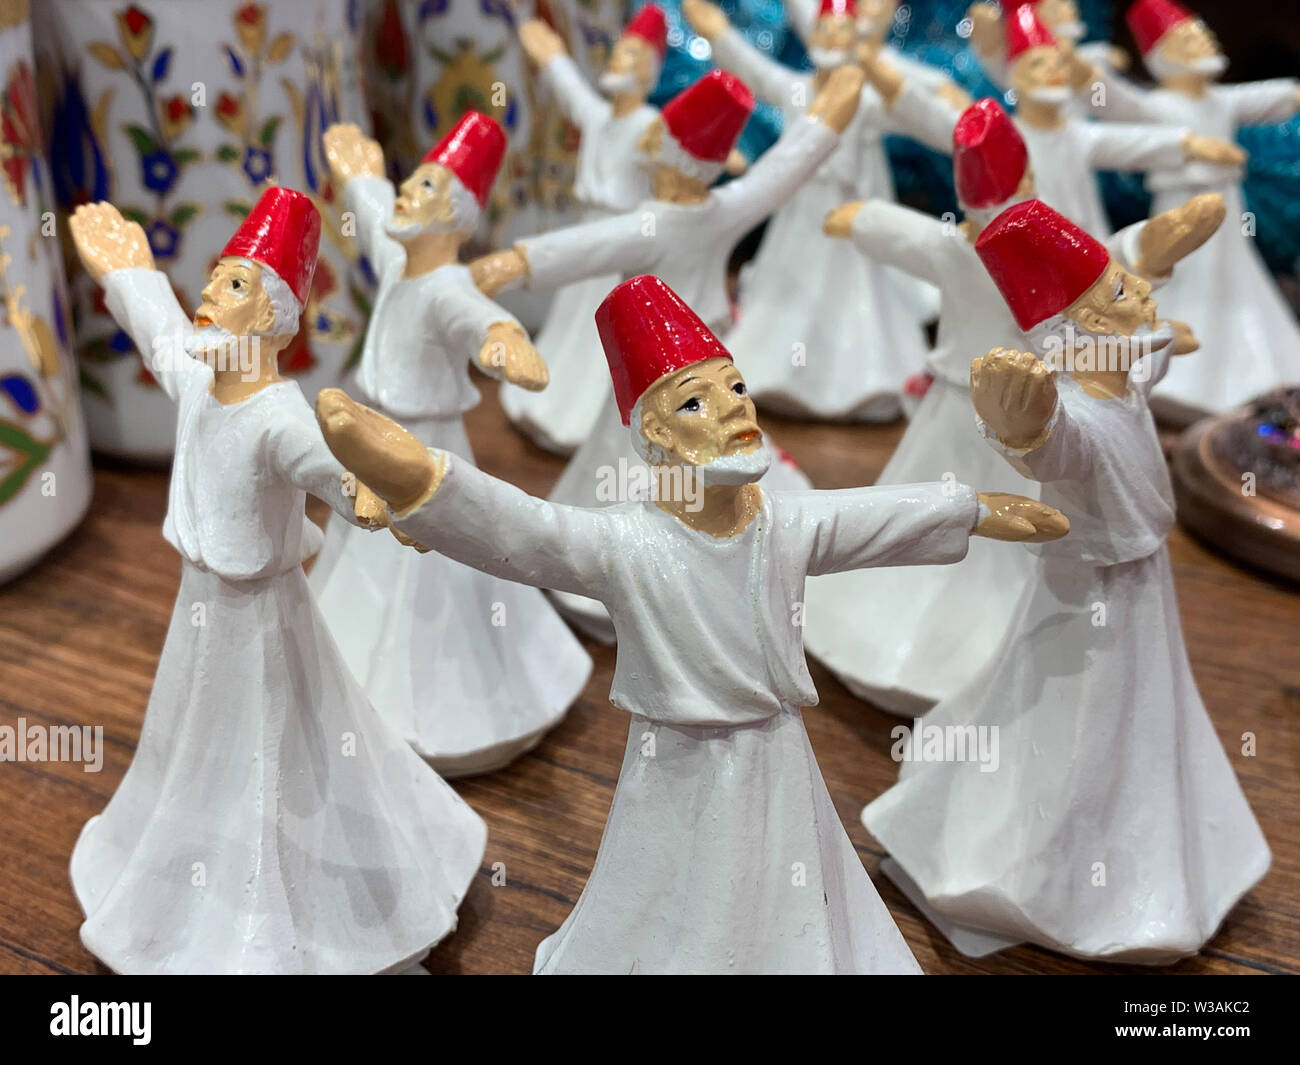 Porcelain figures of Turkish folk dancers, a traditional 'sufi whirling' dance with mediation. Nice gift in a shop as souvenir of Turkey Stock Photo